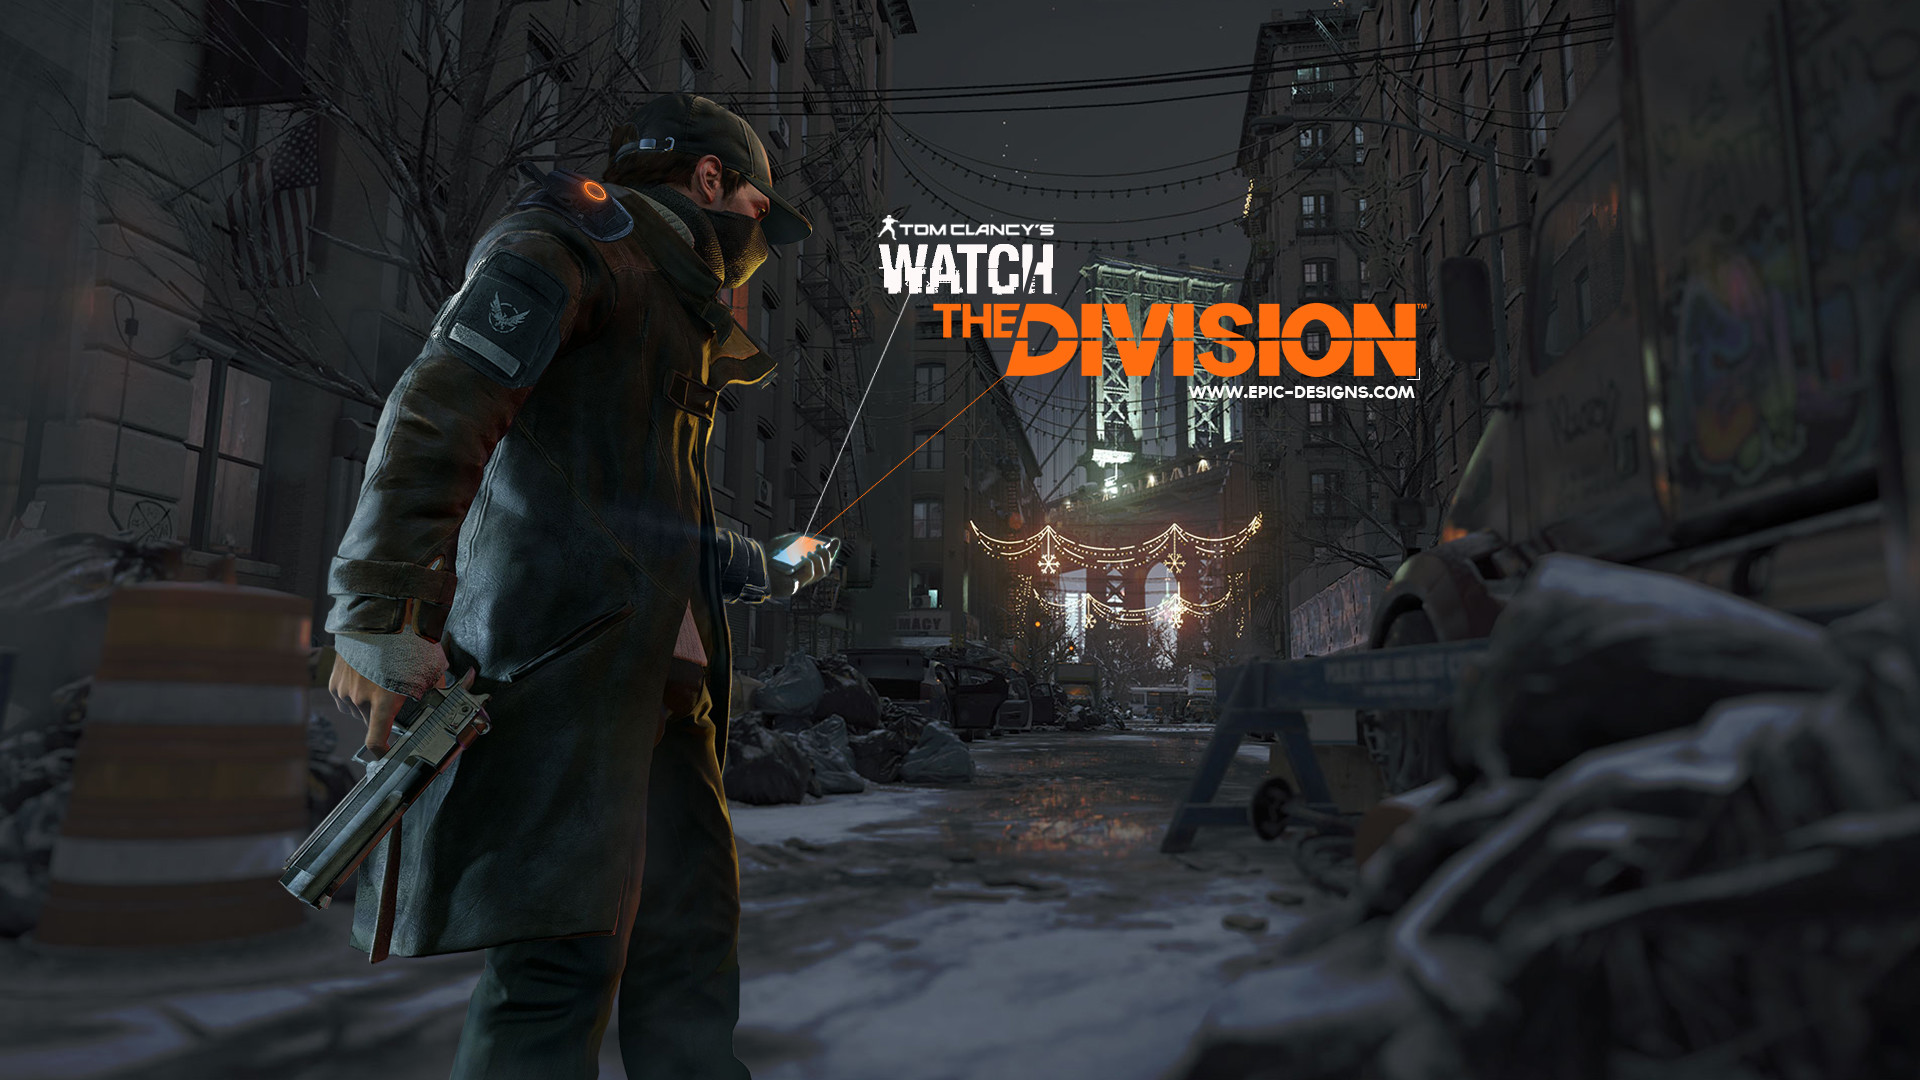 1920x1080 Watch the division wallpaper by EpicDesignsNL Watch the division wallpaper  by EpicDesignsNL